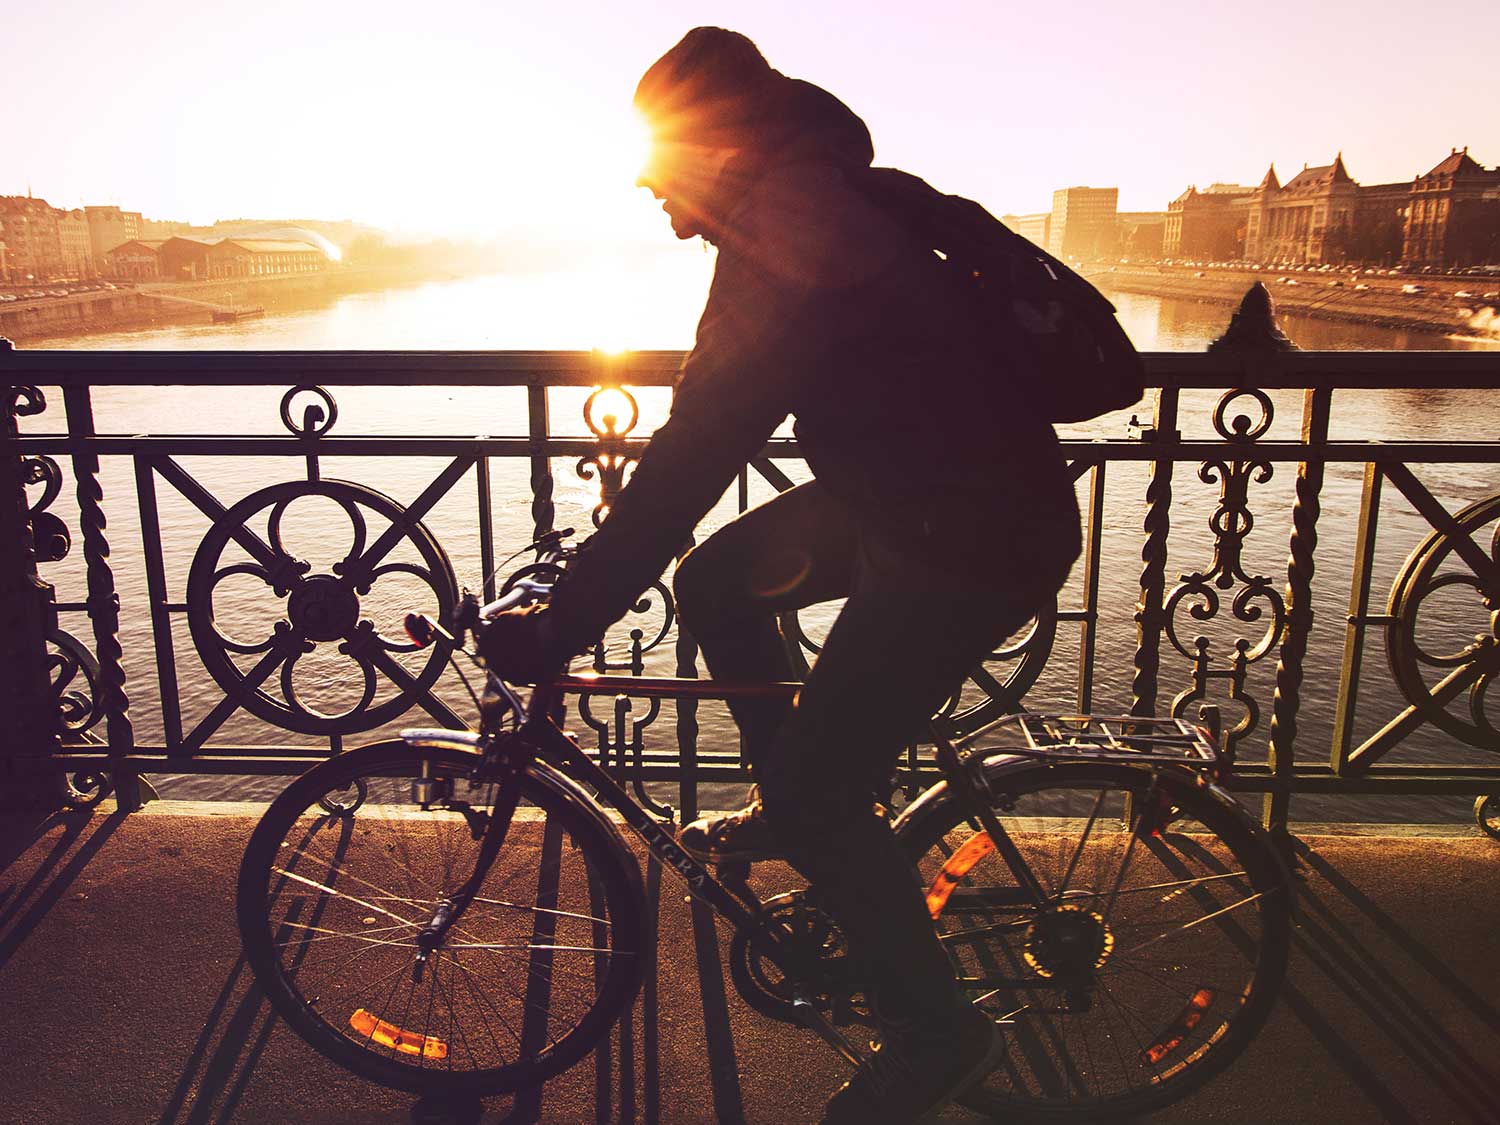 Cycling across a bridge wearing gloves and warm gear.